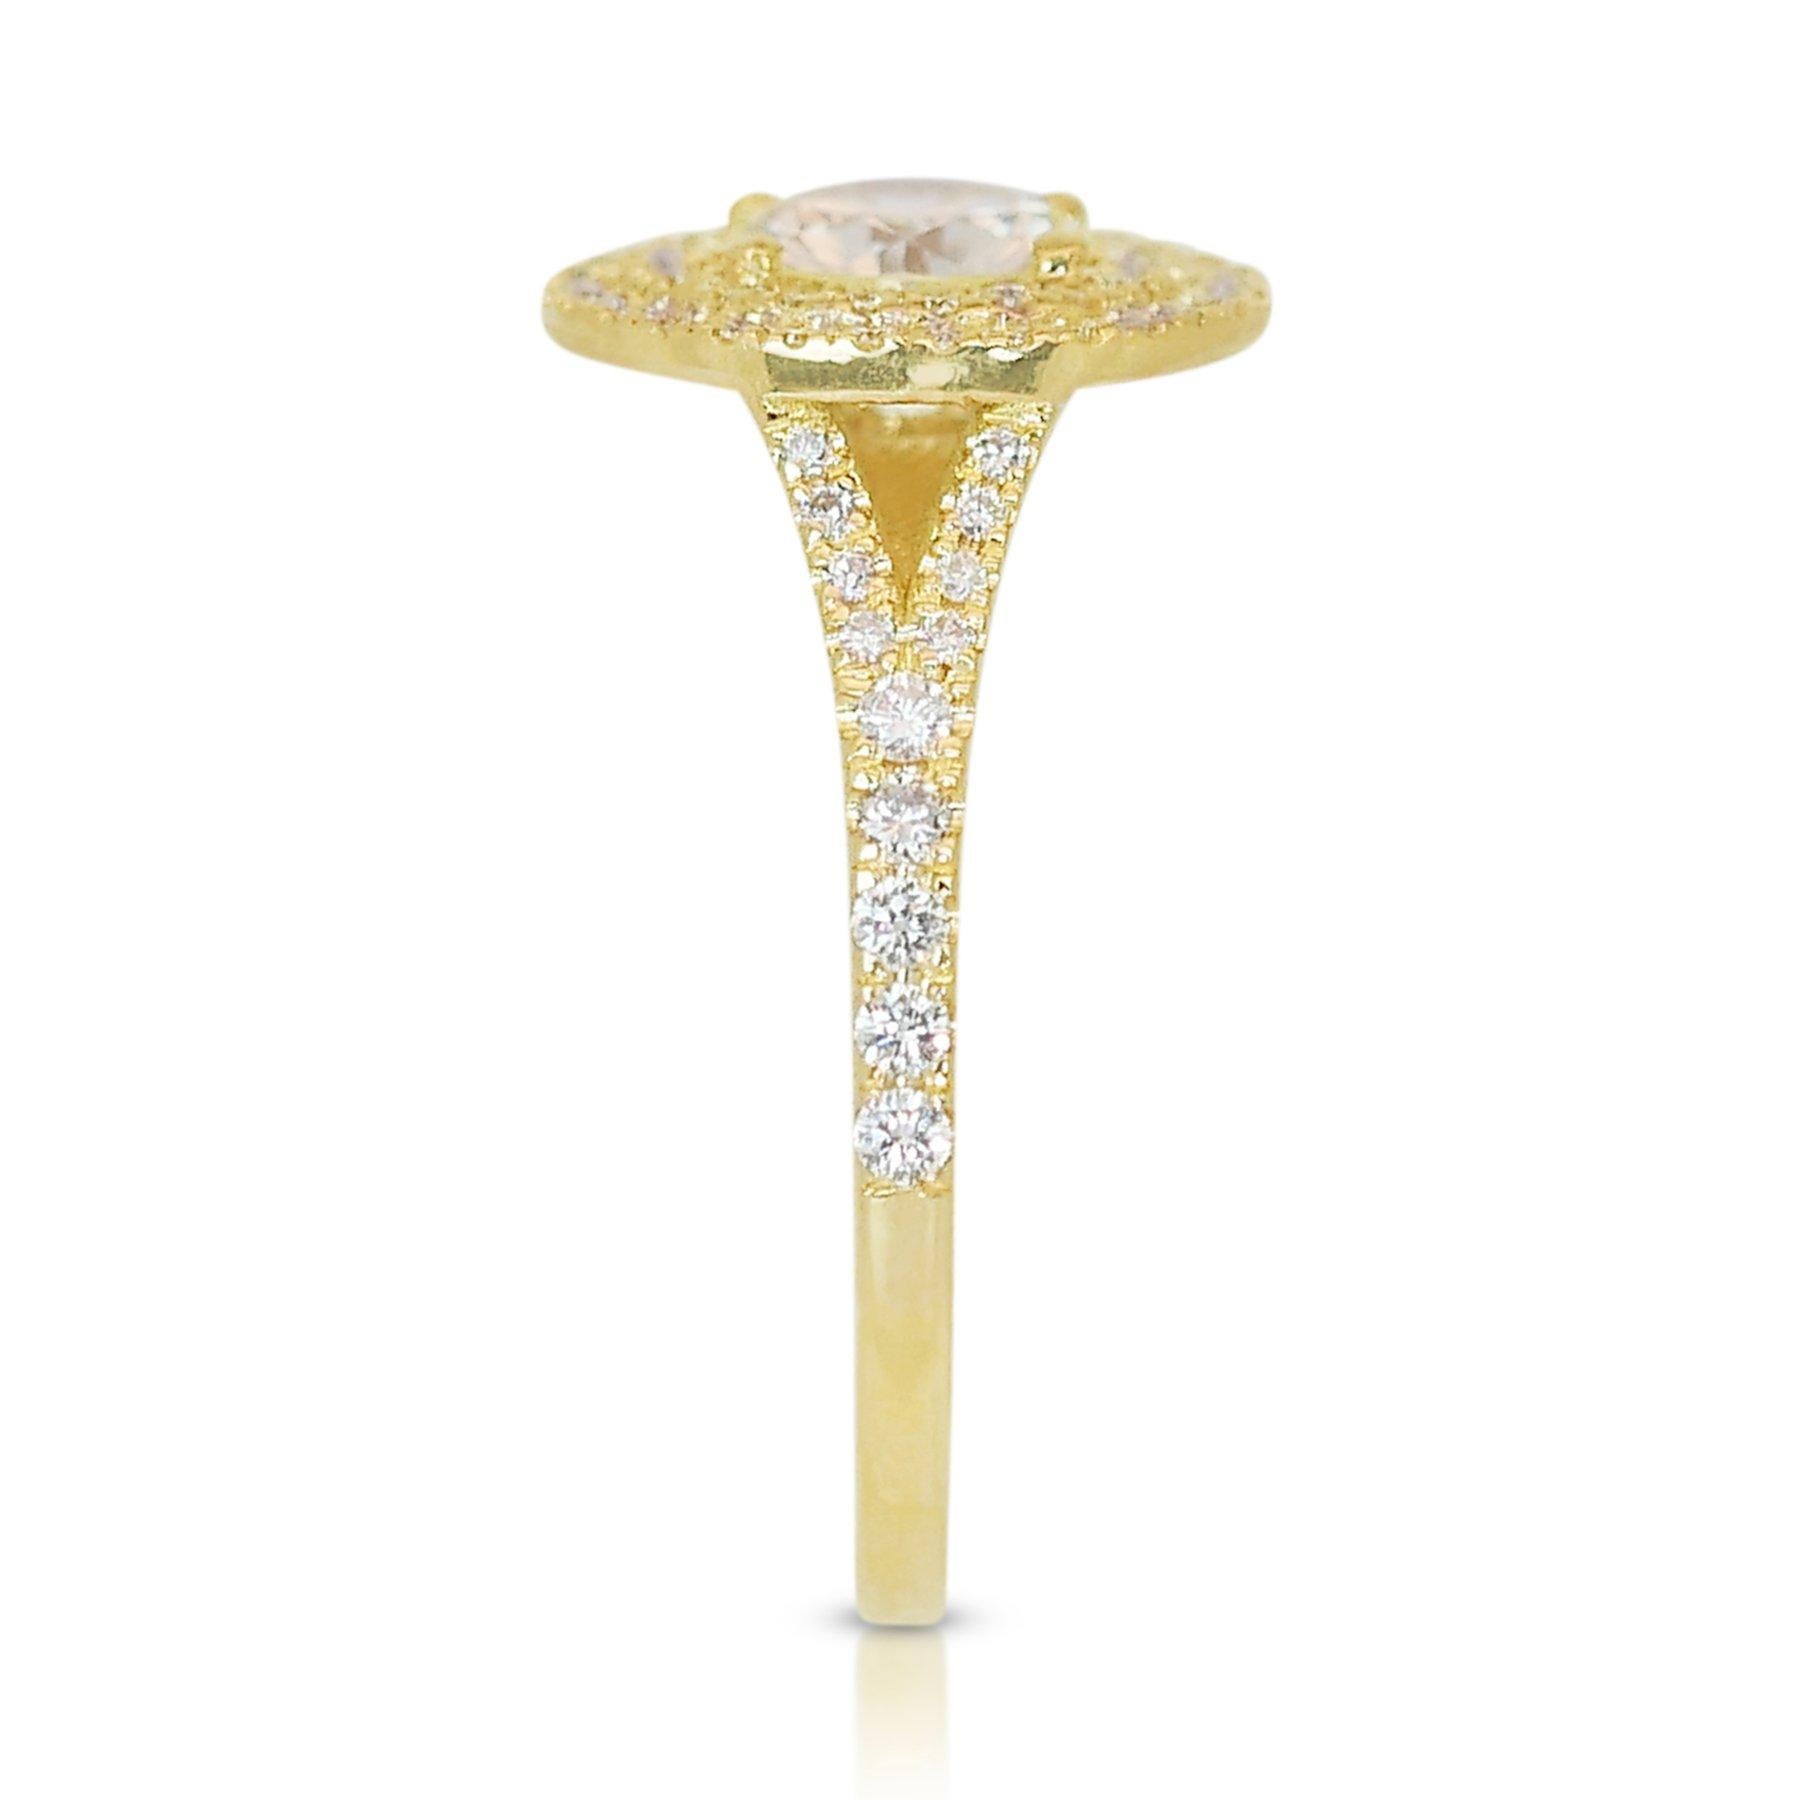 Exquisite 1.44ct Diamond Double Halo Ring in 18k Yellow Gold - GIA Certified For Sale 1